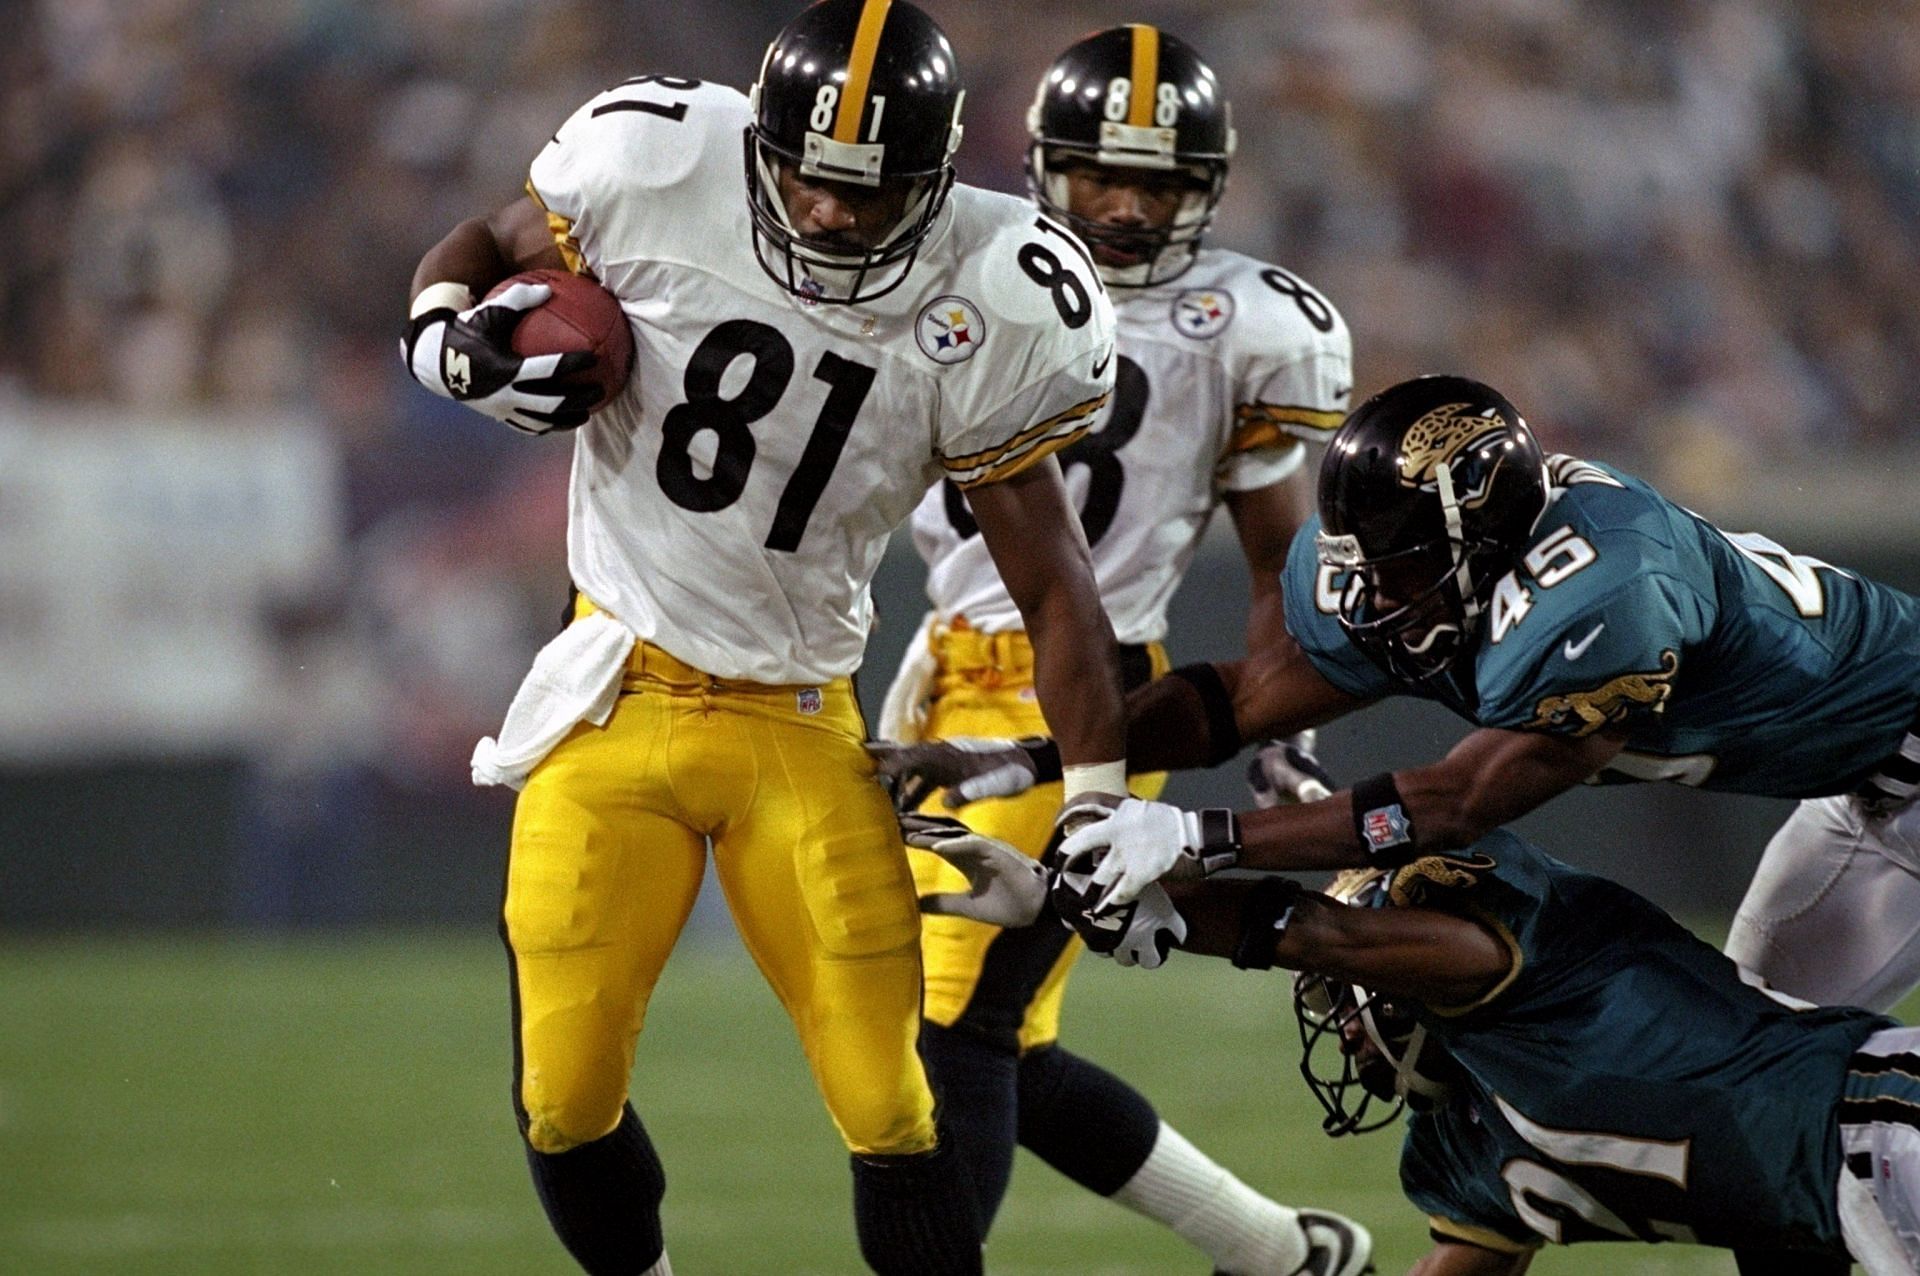 Charles Johnson back in his playing days with the Steelers